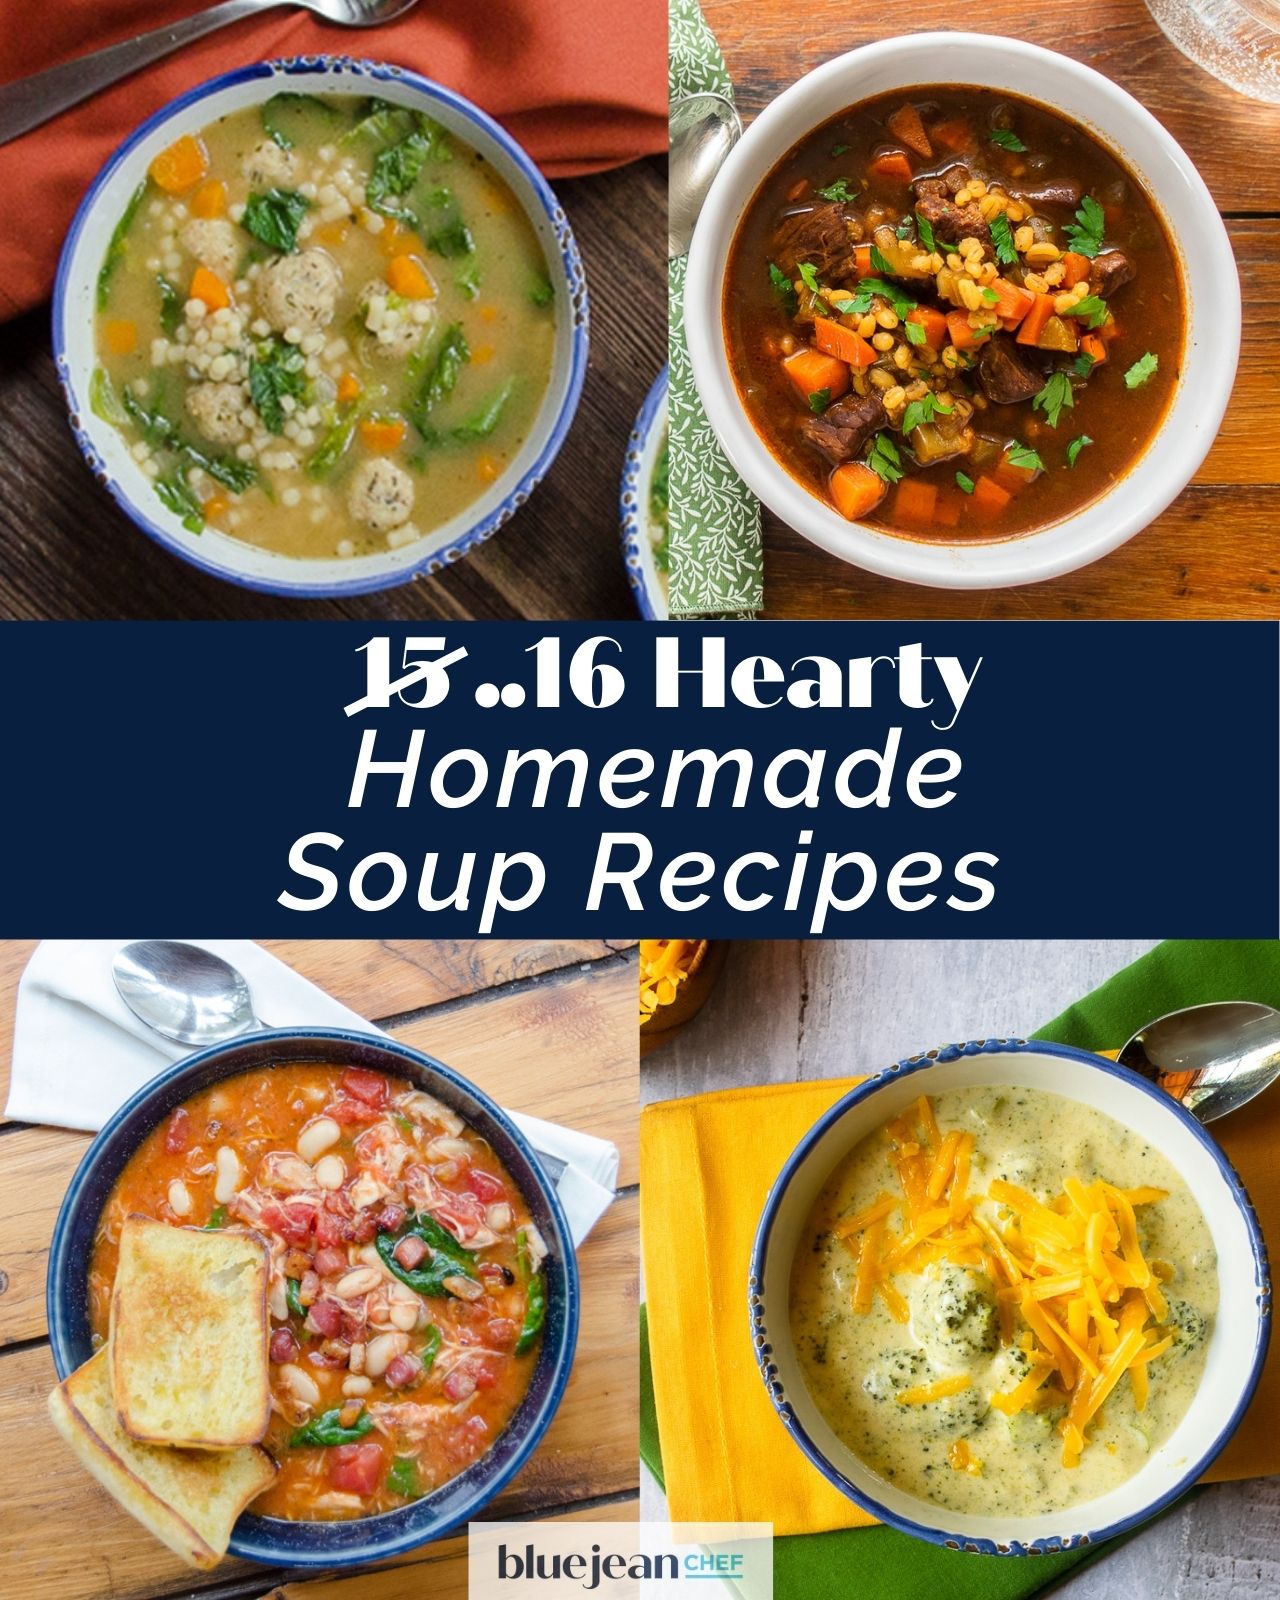 15 Hearty Homemade Soup Recipes | Blue Jean Chef - Meredith Laurence